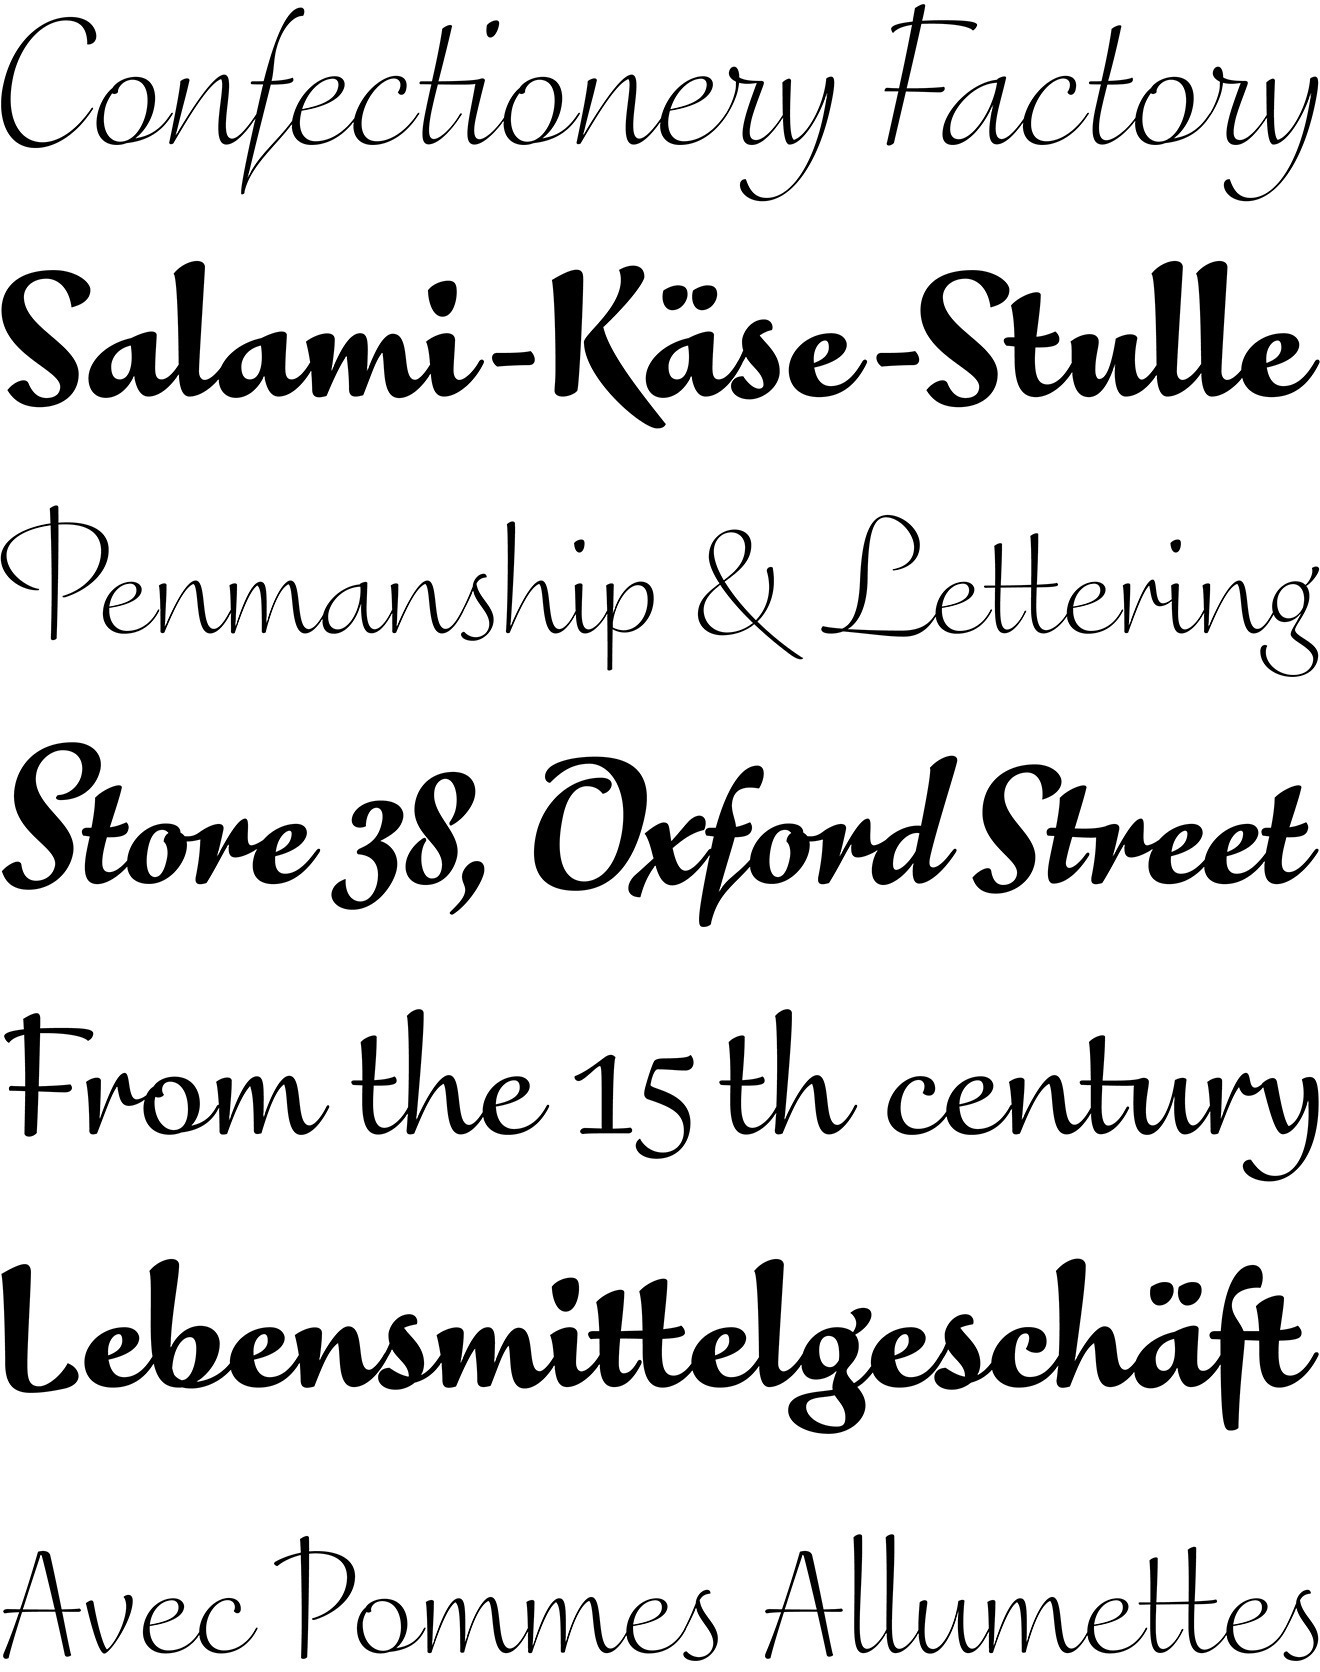 Unique characteristics of the font include italics (a real rarity in script form), a thin style reminiscent of a pen or a thin marker, whilst the bolder styles could have been done with a brush or market. However, whilst it takes a step away from a traditional script its uppercase works well both alone and mixed with lowercase characters. 